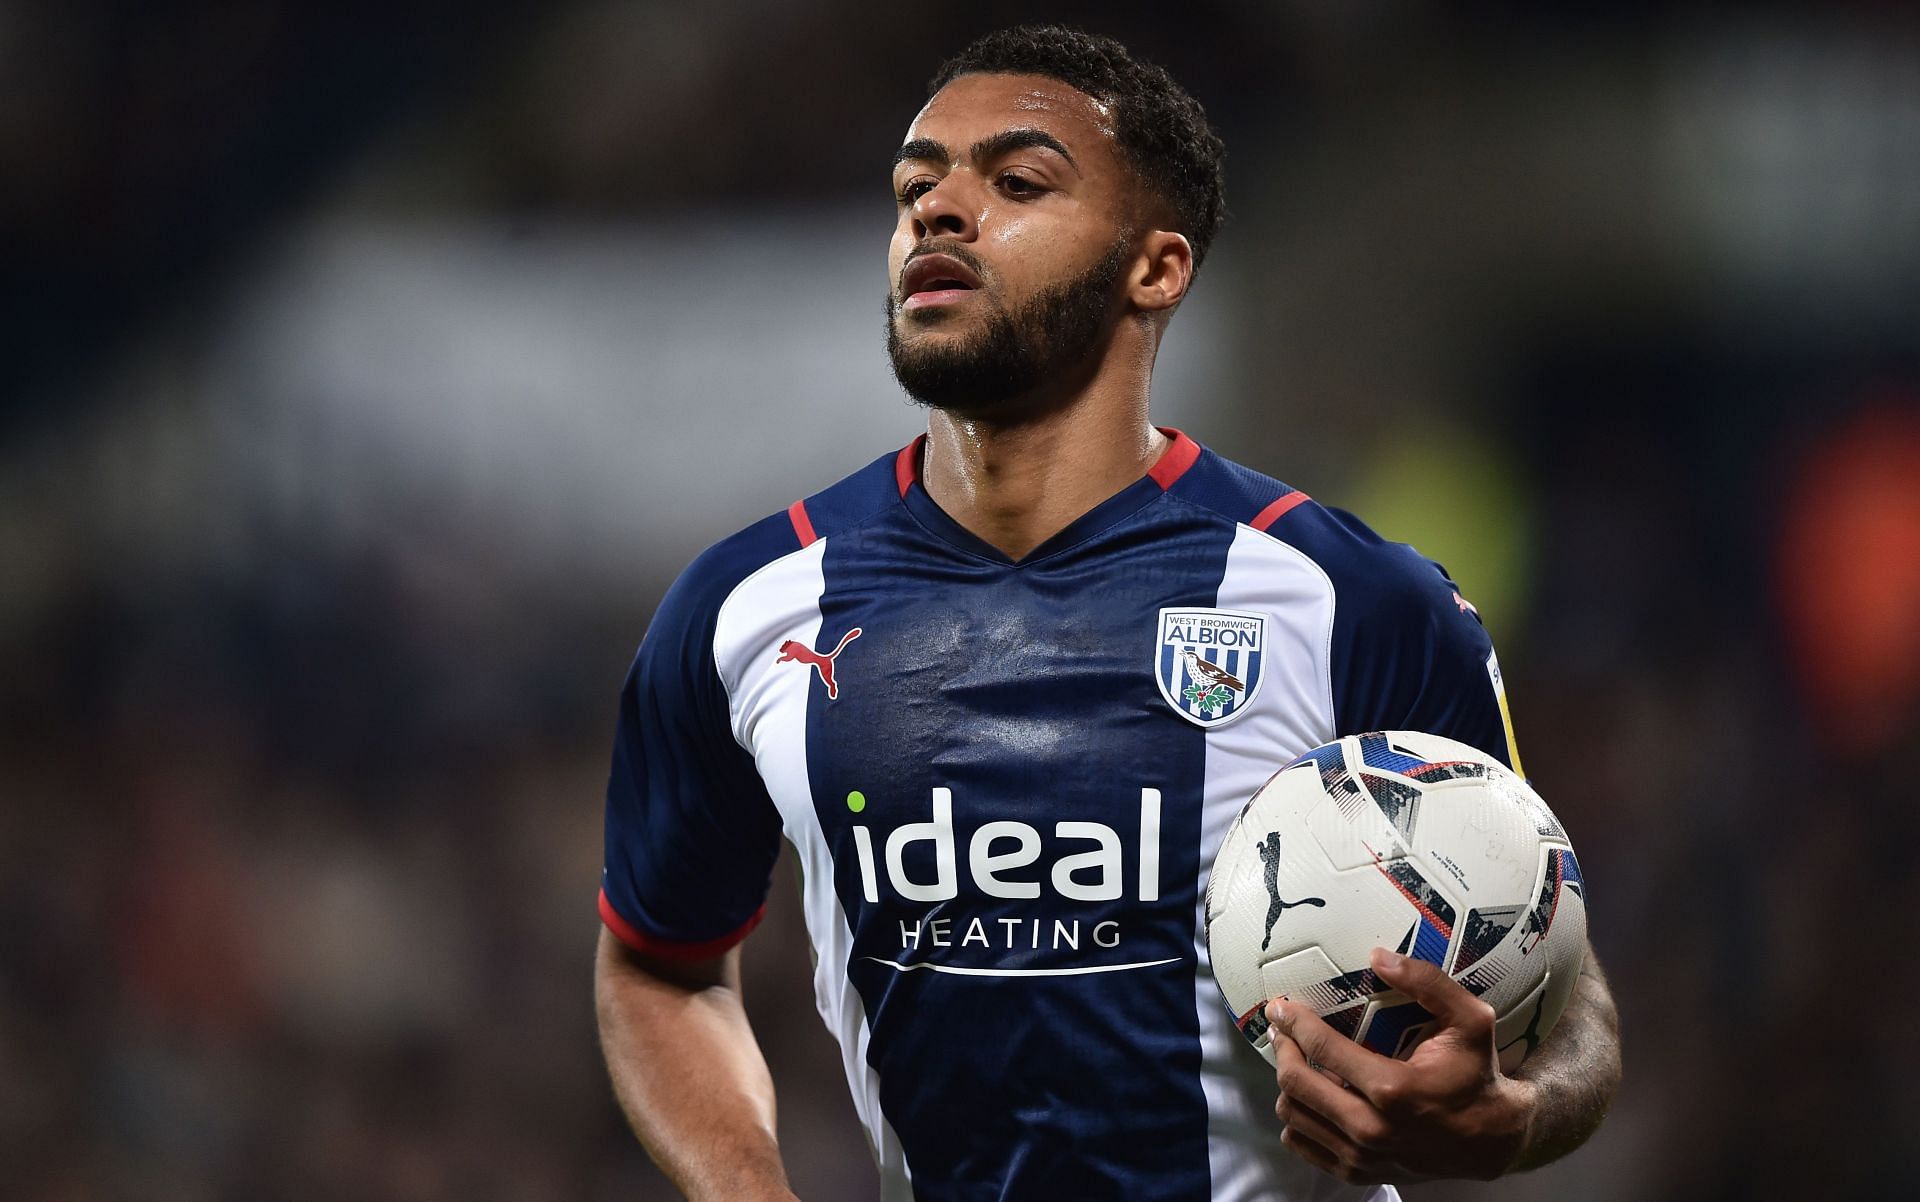 West Bromwich Albion will host Preston North End on Wednesday - EFL Championship